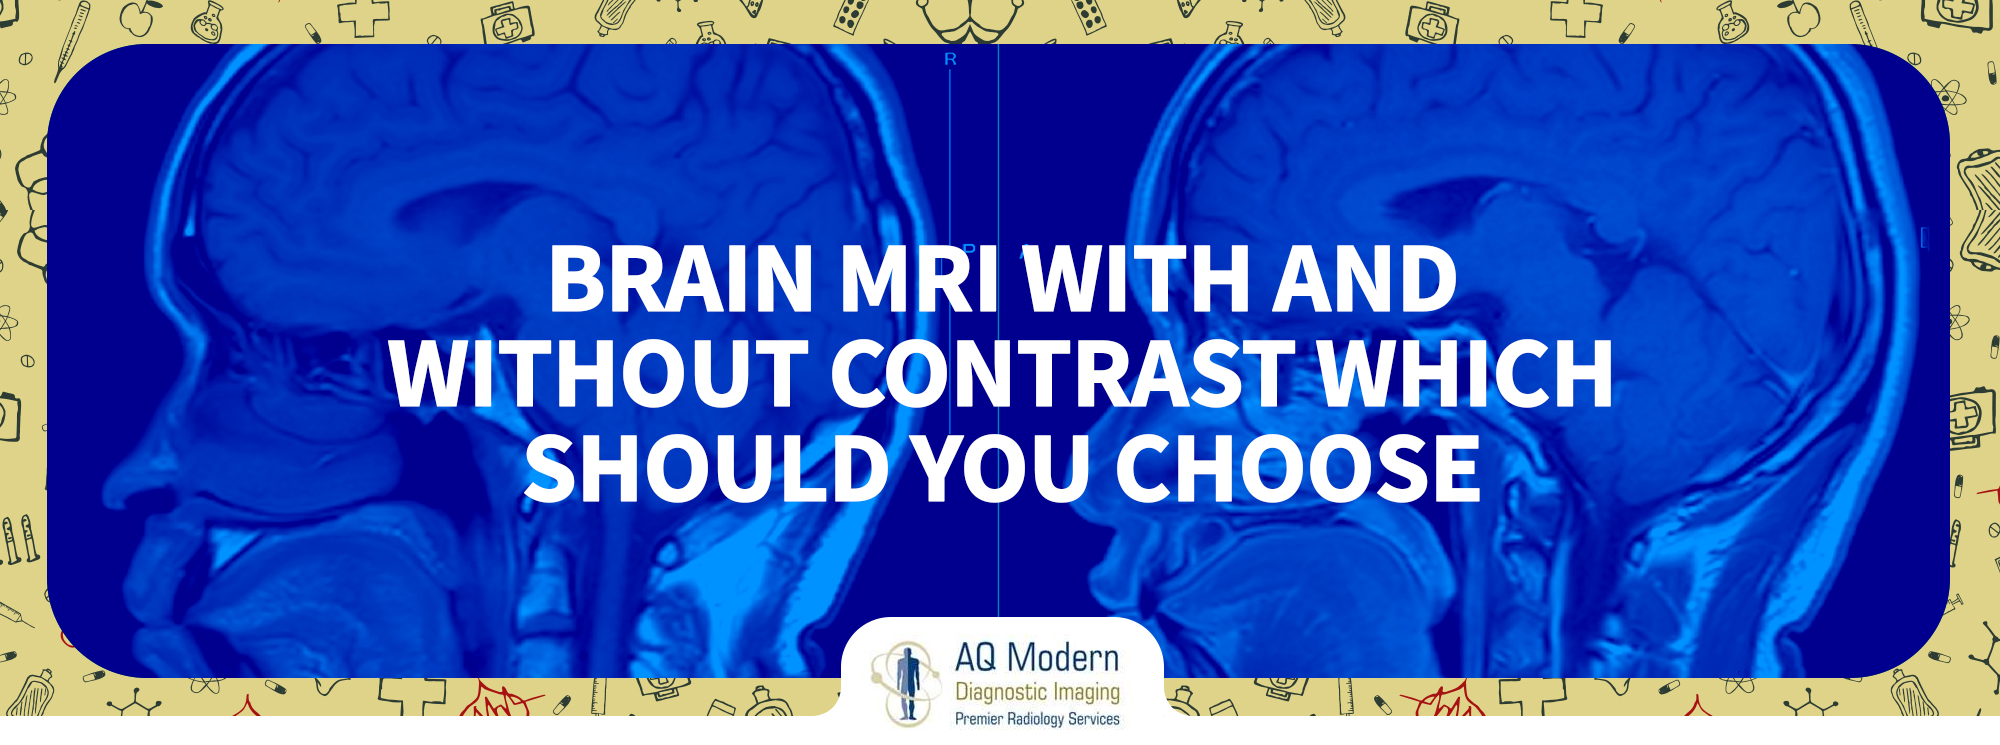 Brain MRI With And Without Contrast